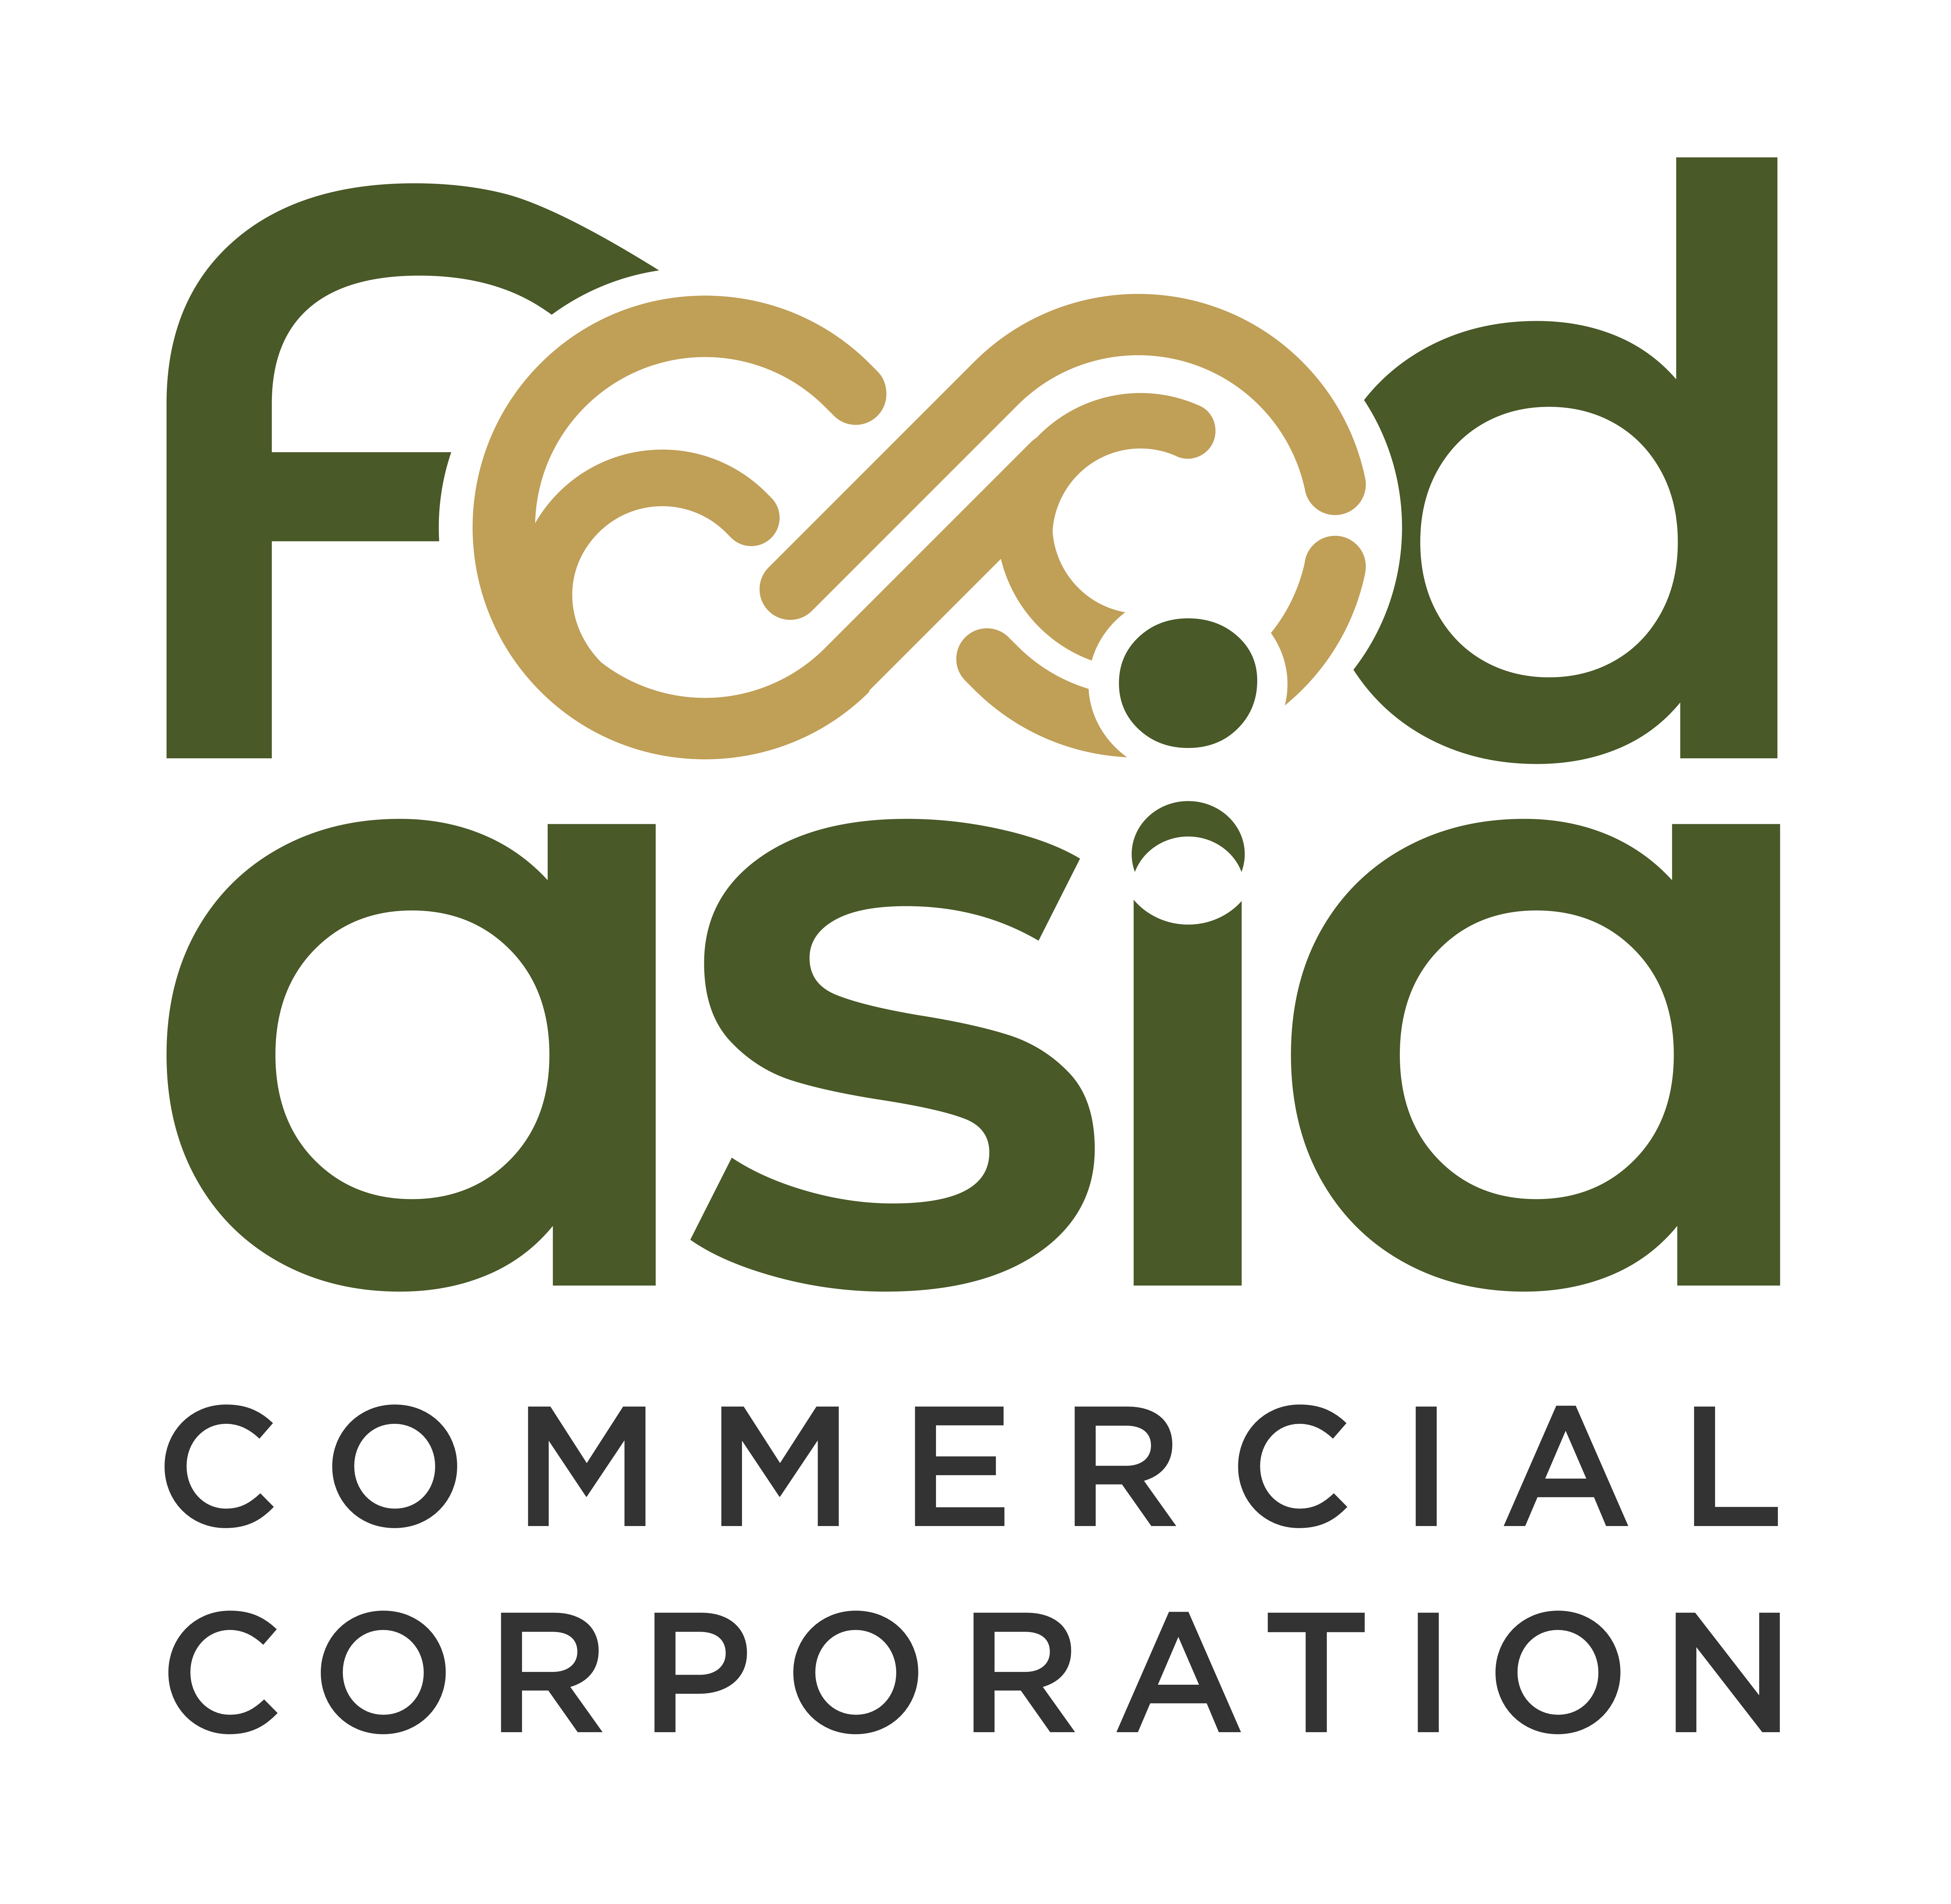 Foodasia Commercial Corporation